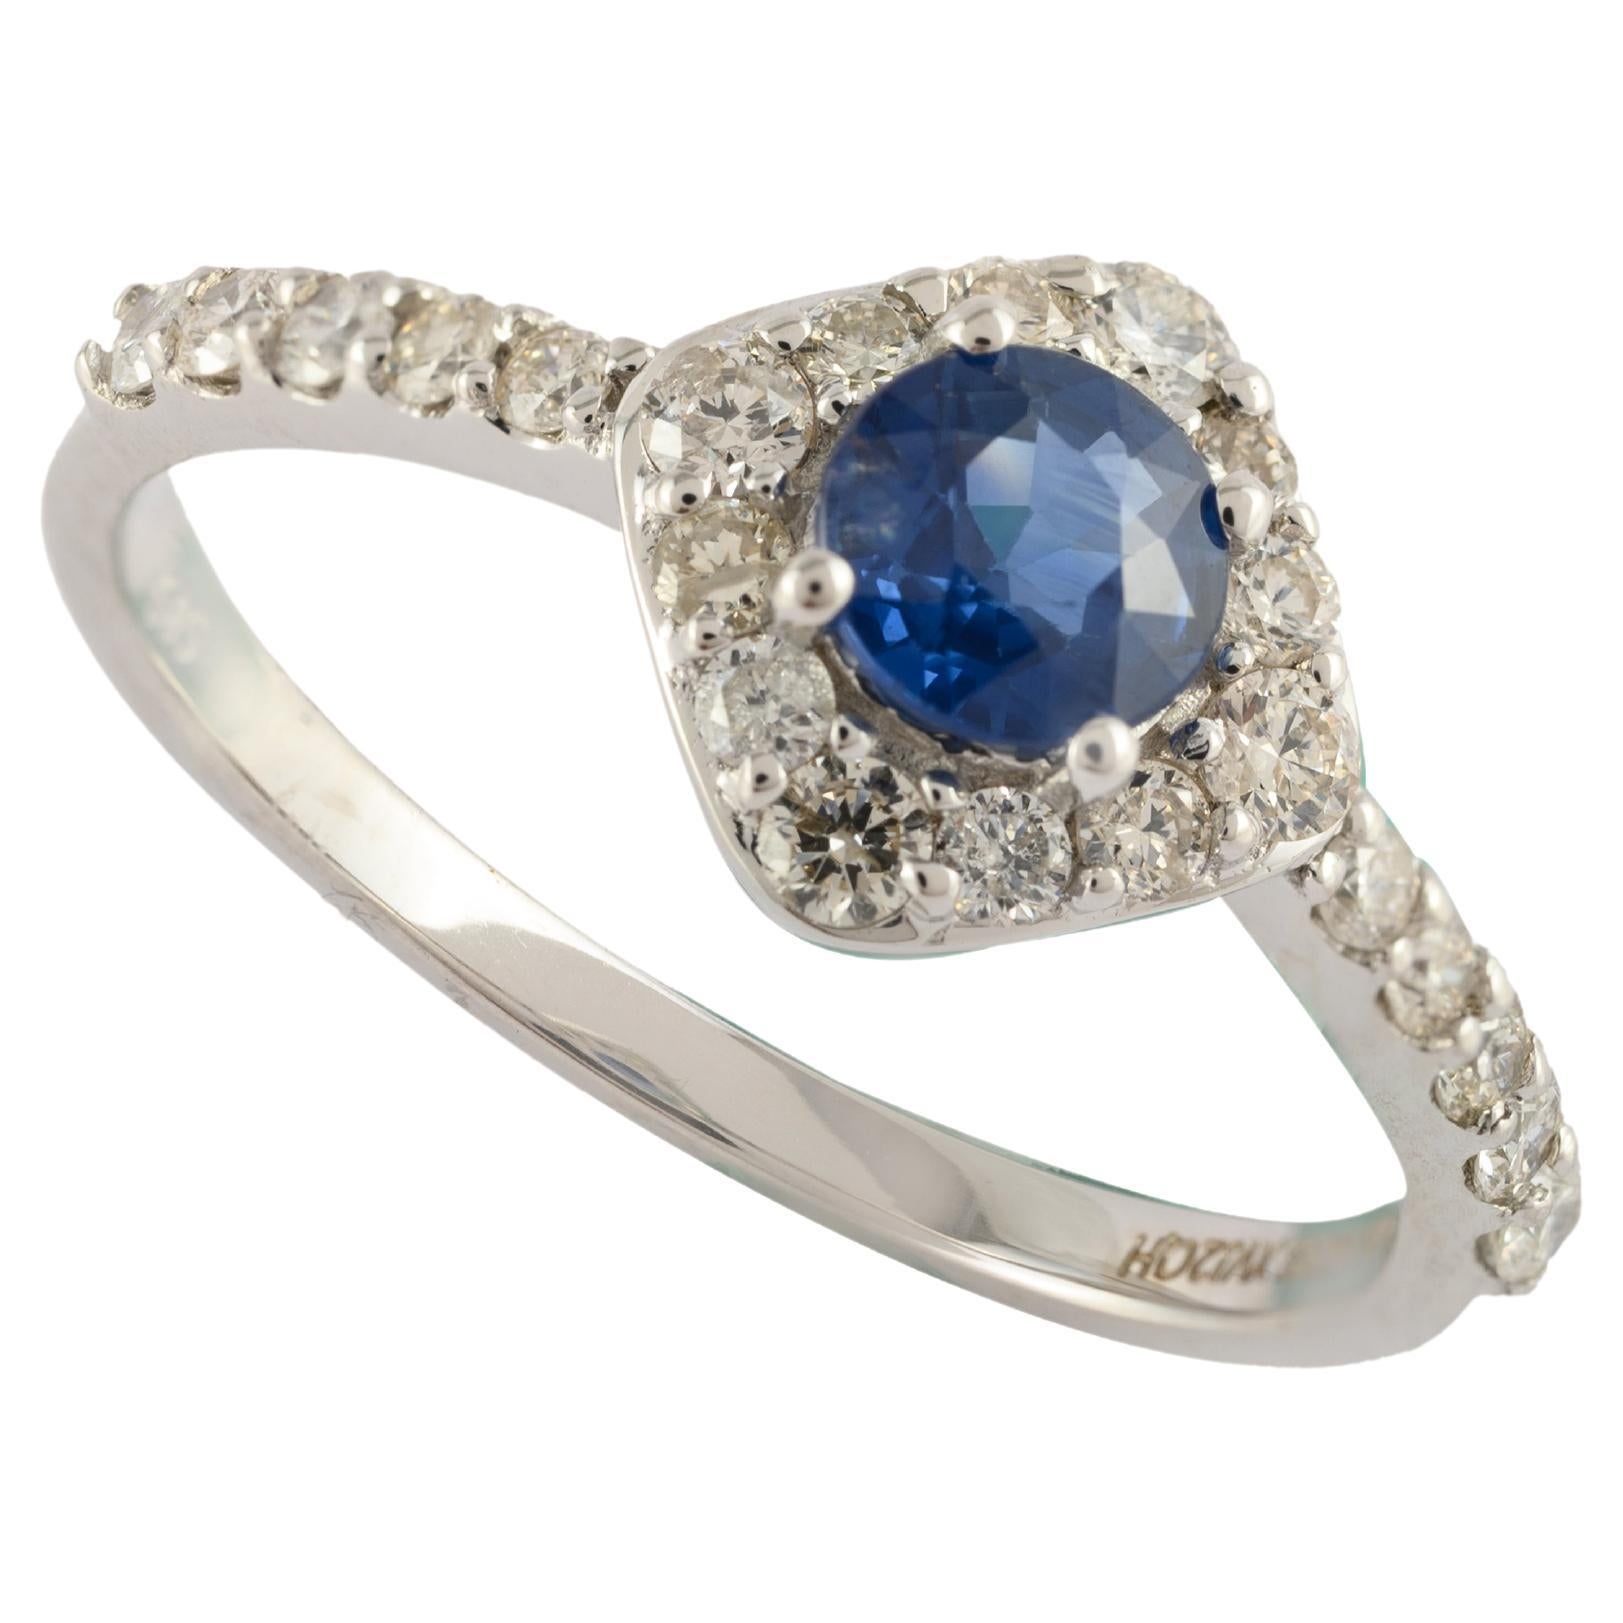 For Sale:  Royal Blue Sapphire with Halo Diamond Ring Crafted in Solid 14k White Gold